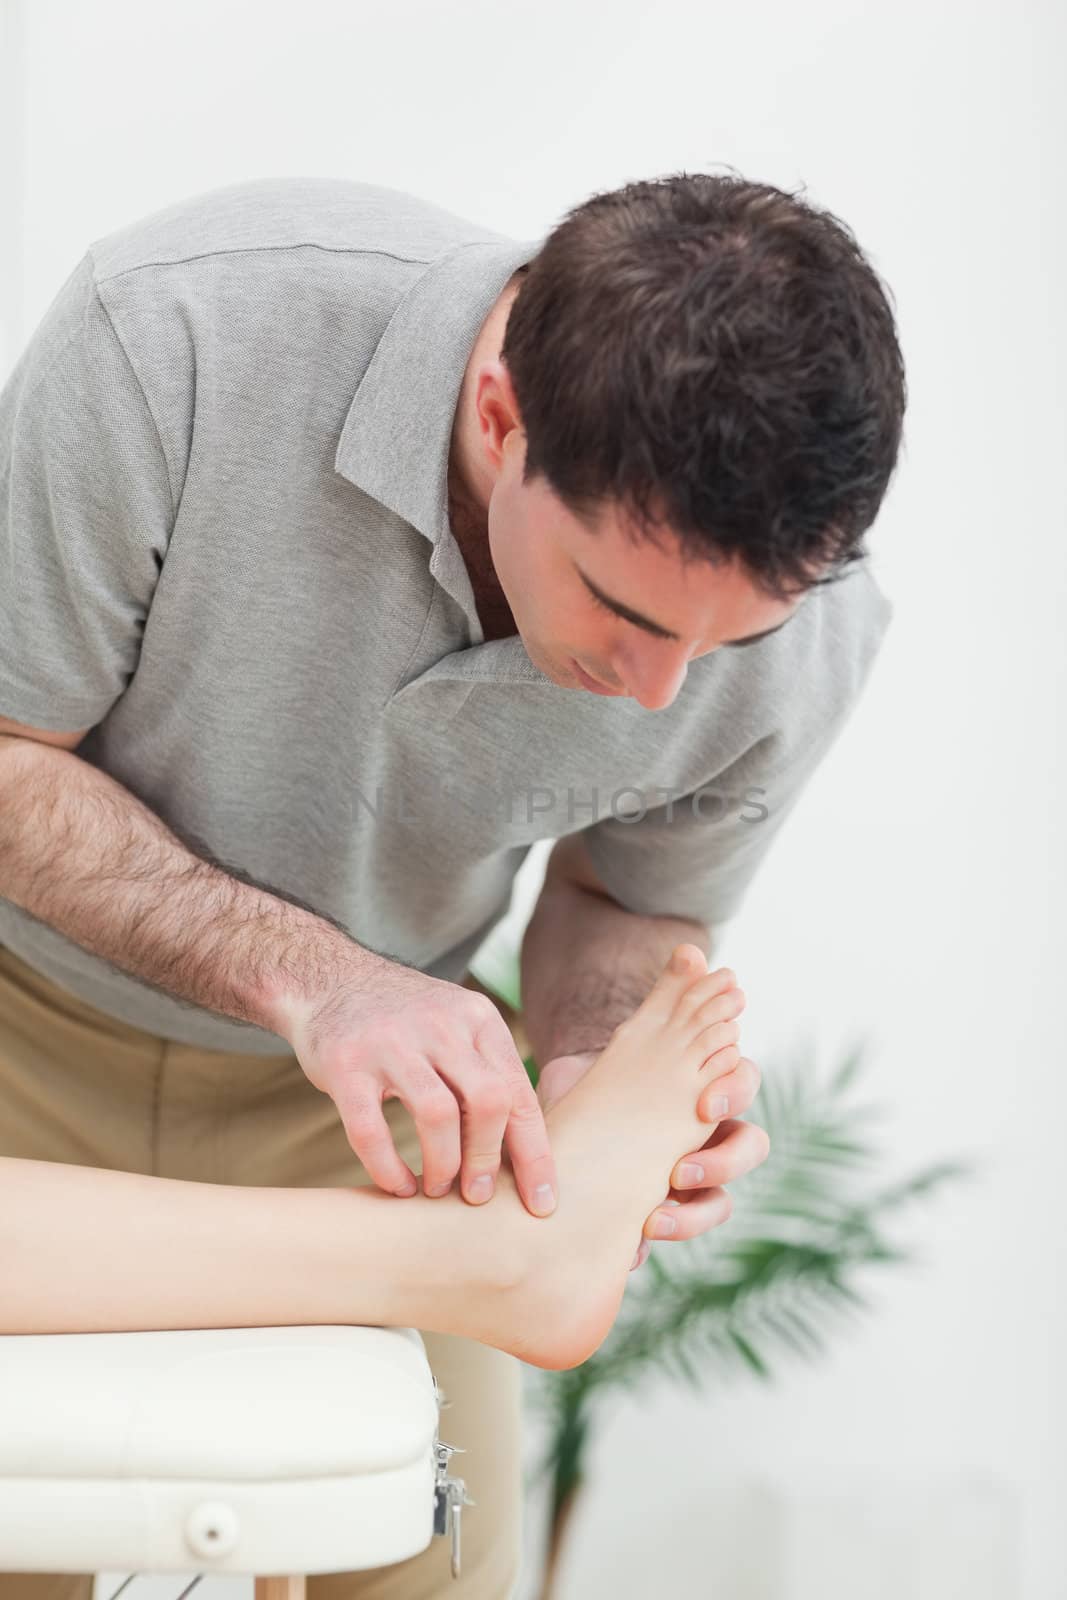 Podiatrist examining the foot of a patient by Wavebreakmedia